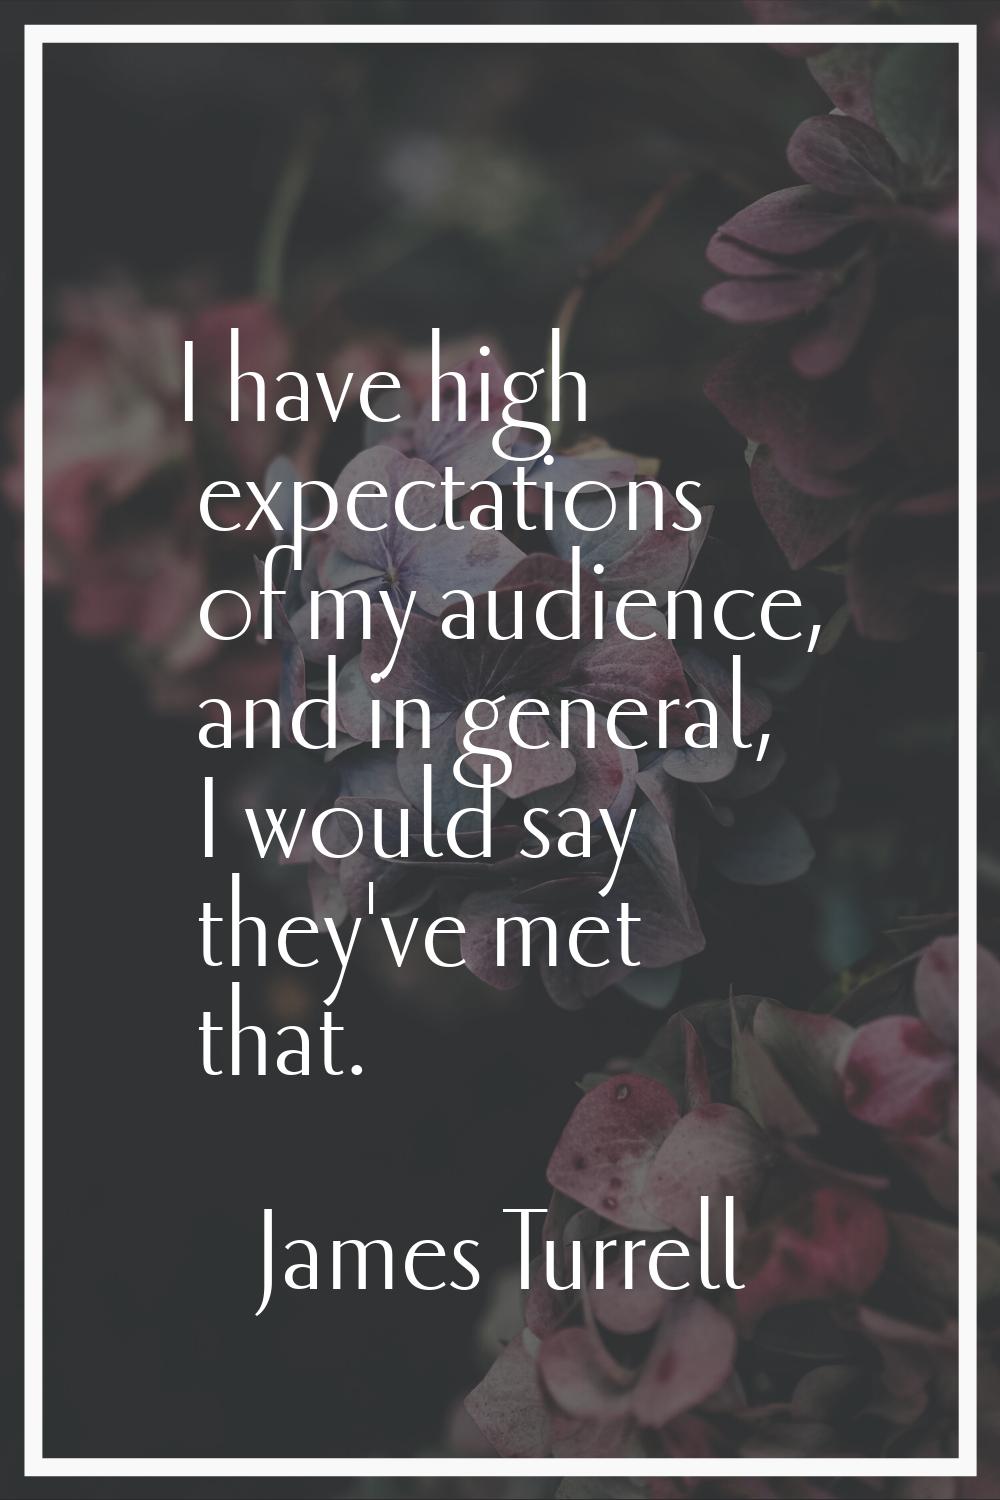 I have high expectations of my audience, and in general, I would say they've met that.